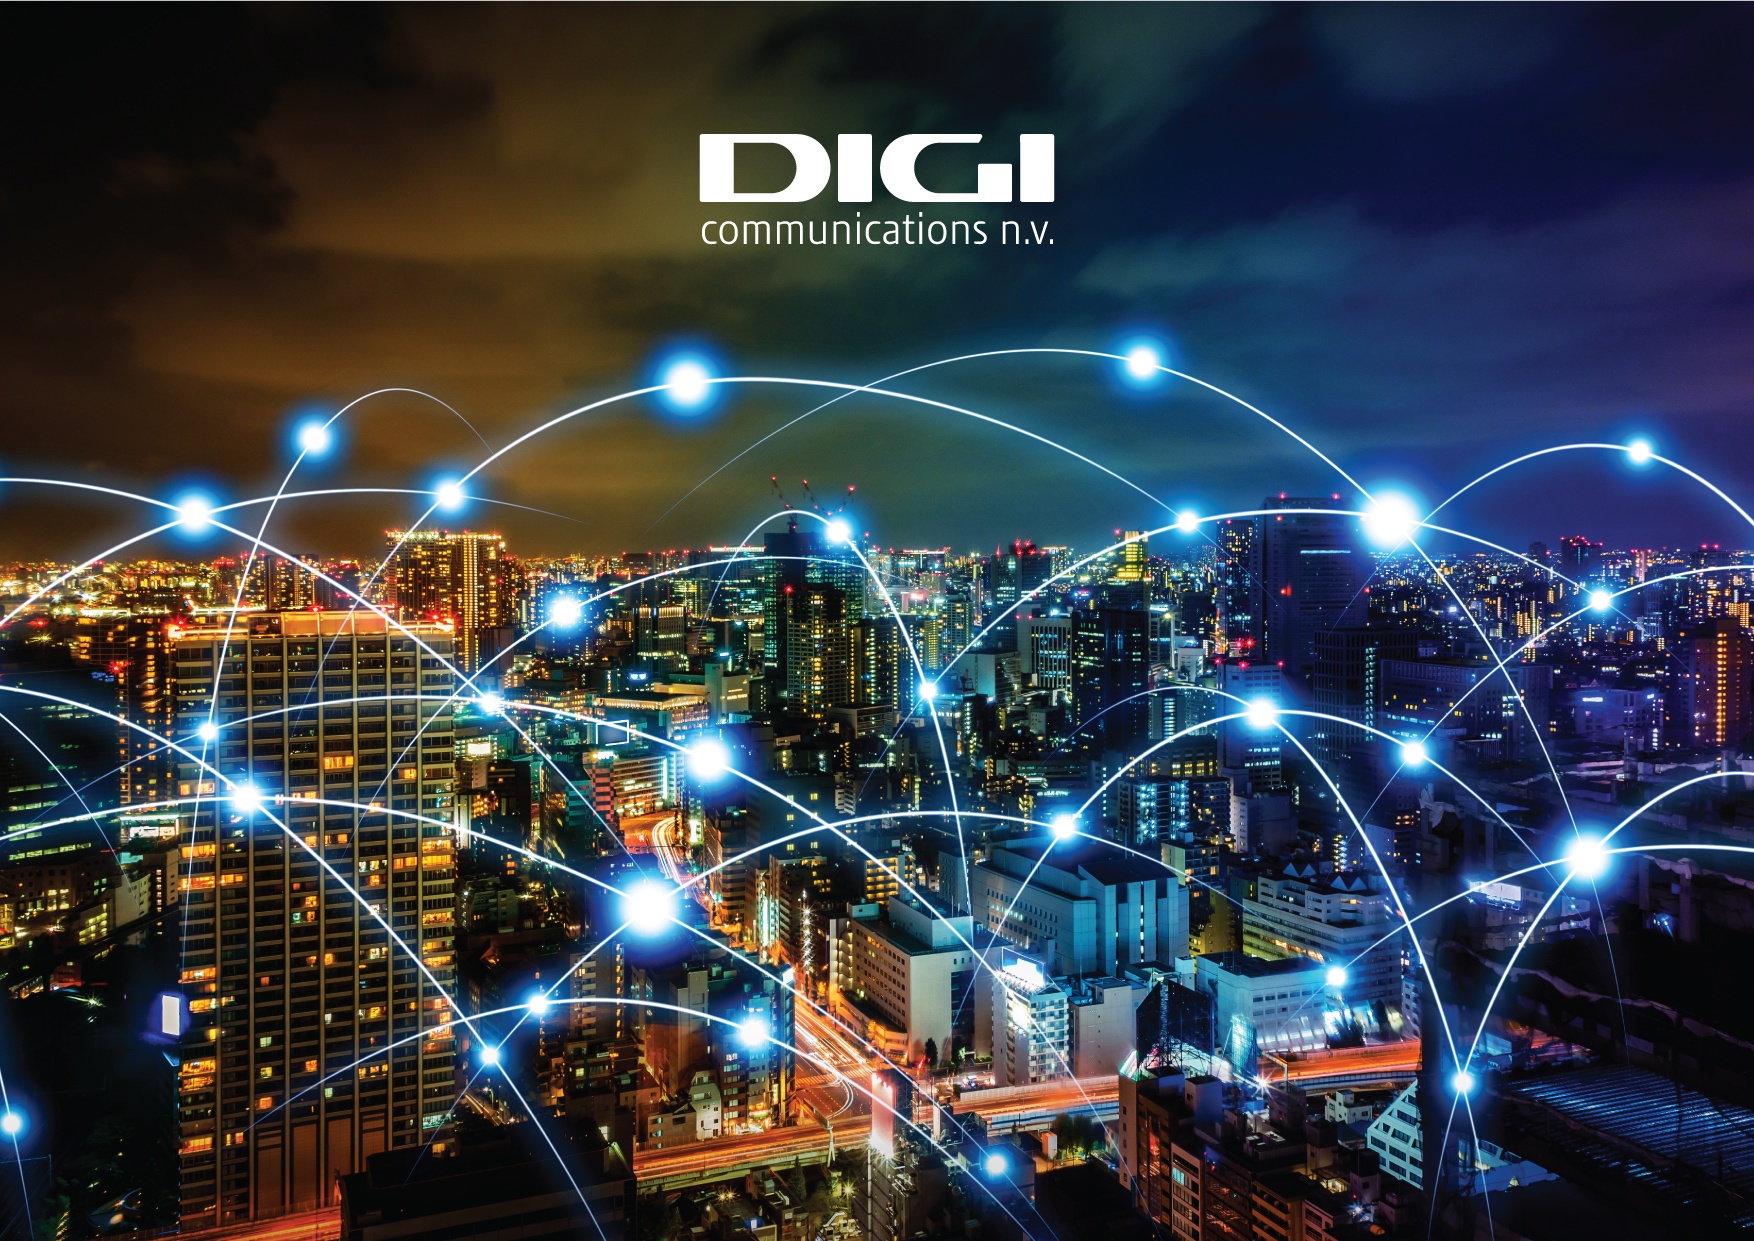 Digi Communications N.V. announces that conditional stock options were granted to executive directors of the Company based on the general shareholders’ meeting approval from 18 May 2021